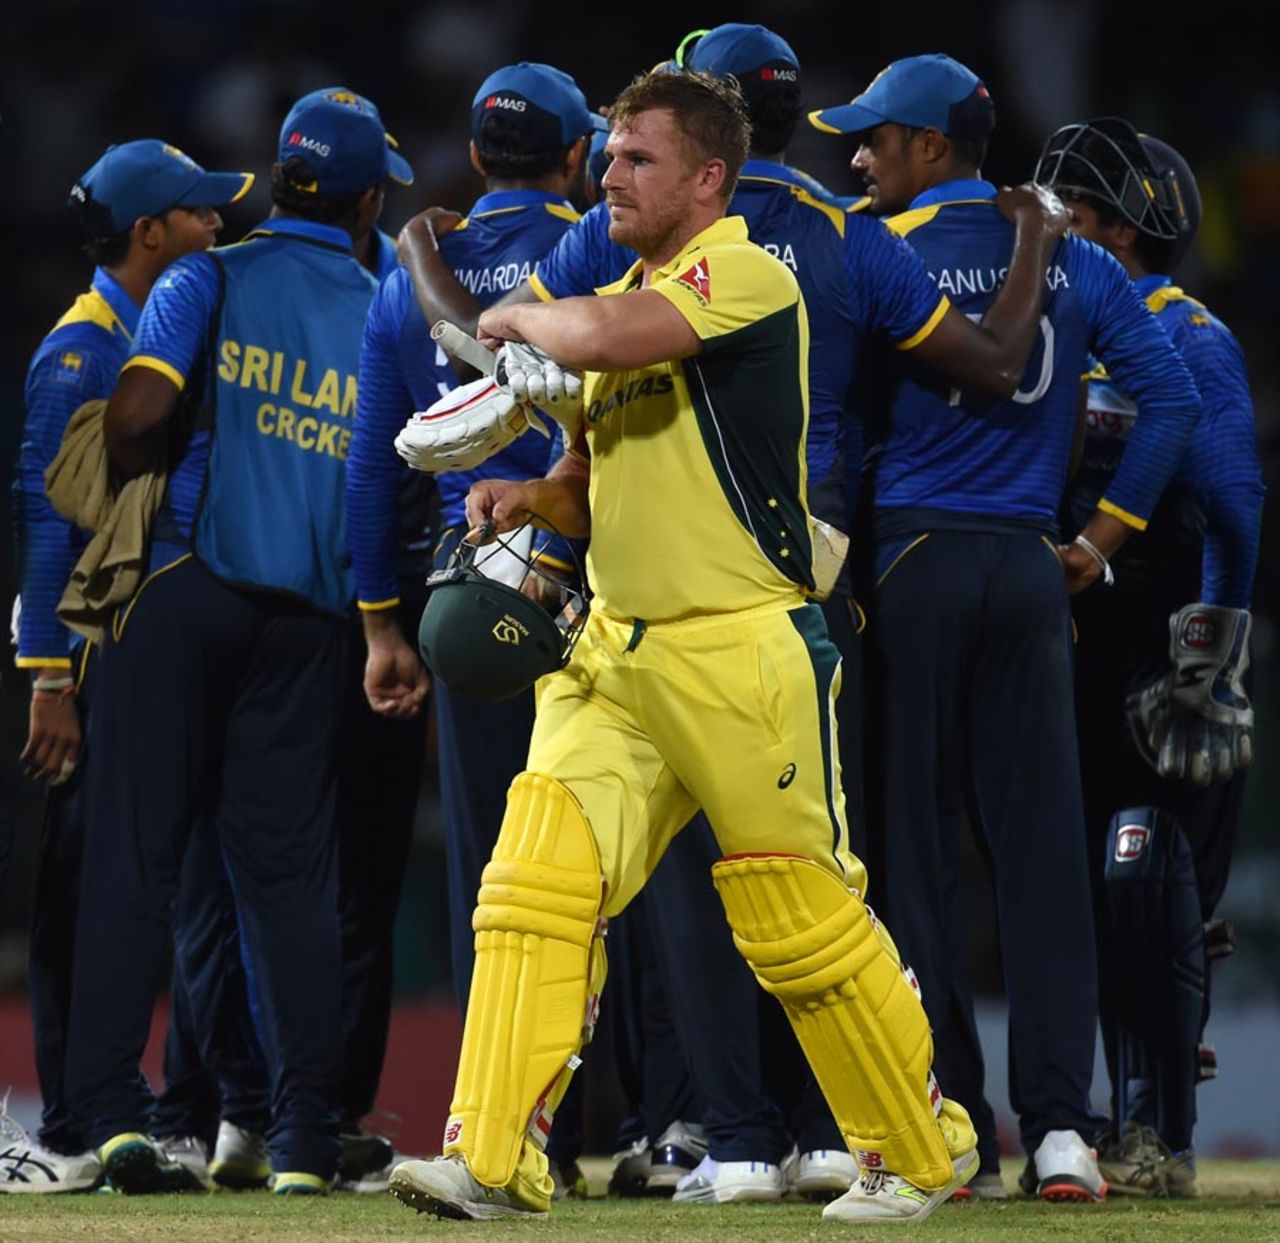 Aaron Finch looked markedly disgruntled after being given out, Sri Lanka v Australia, 1st ODI, R Premadasa Stadium, August 21, 2016